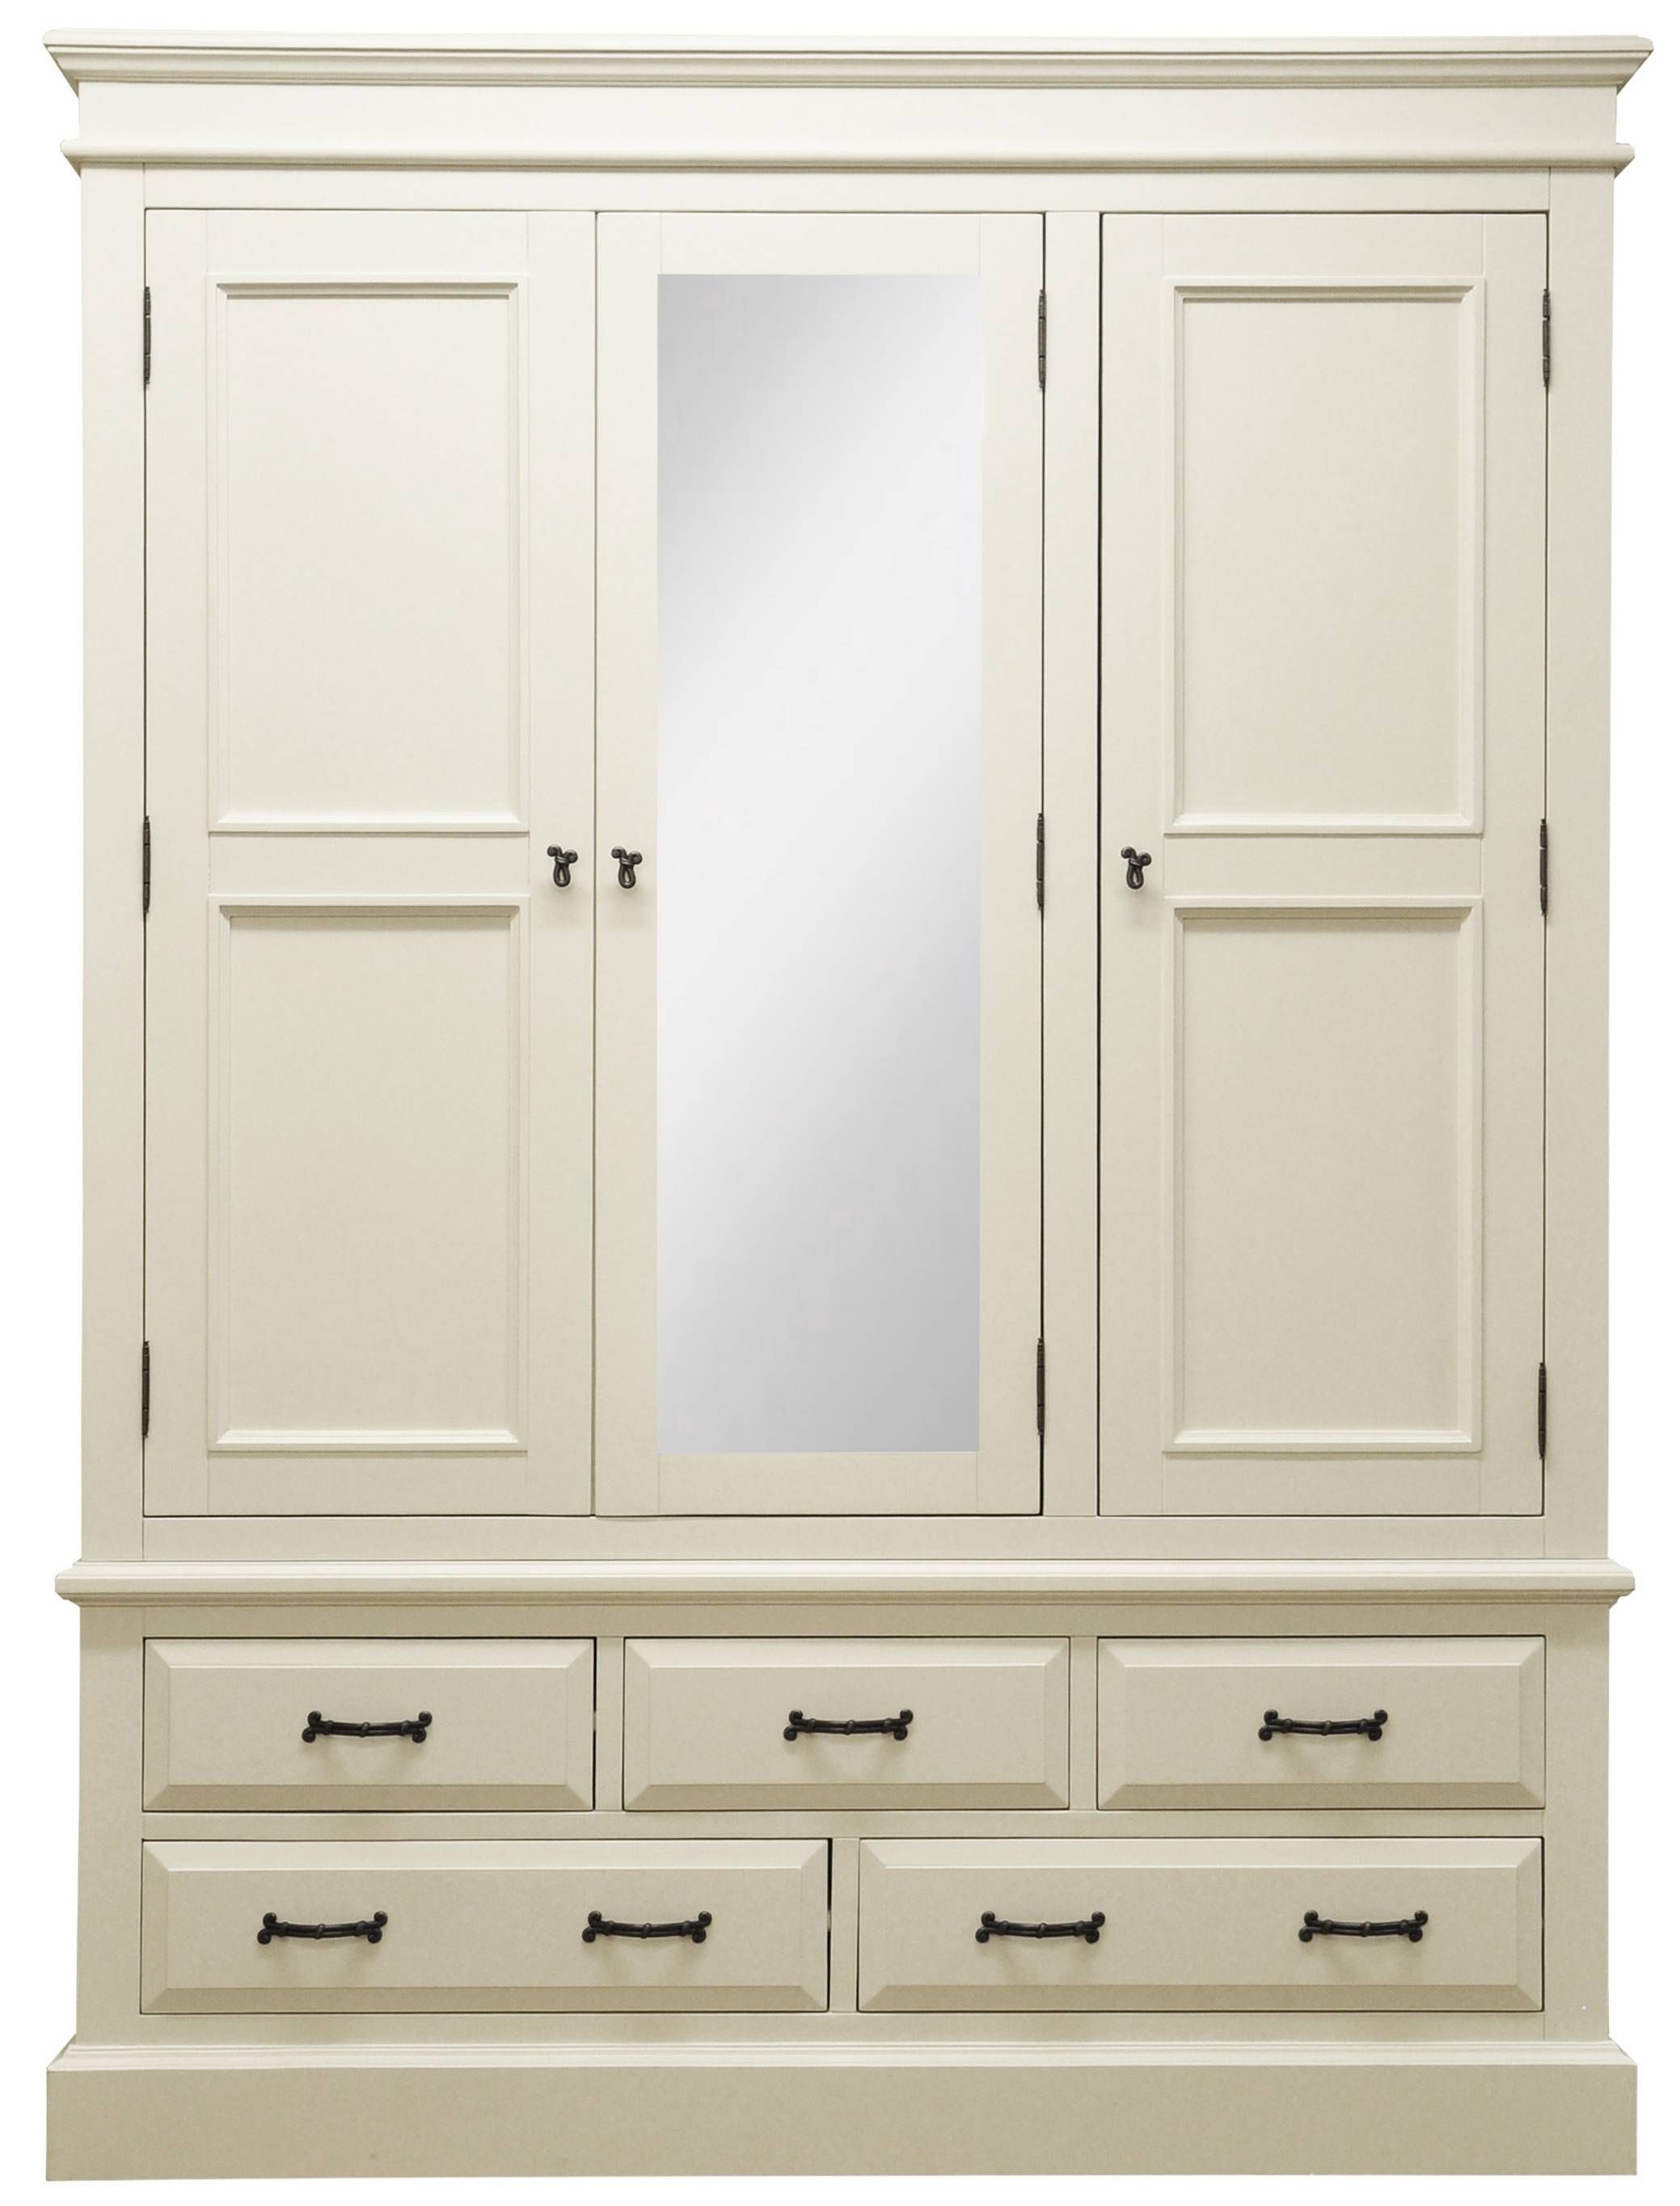 Wardrobes : Henleaze 5 Drawer Painted Wardrobe With Mirrorhenleaze For White 3 Door Wardrobes With Drawers (View 5 of 15)